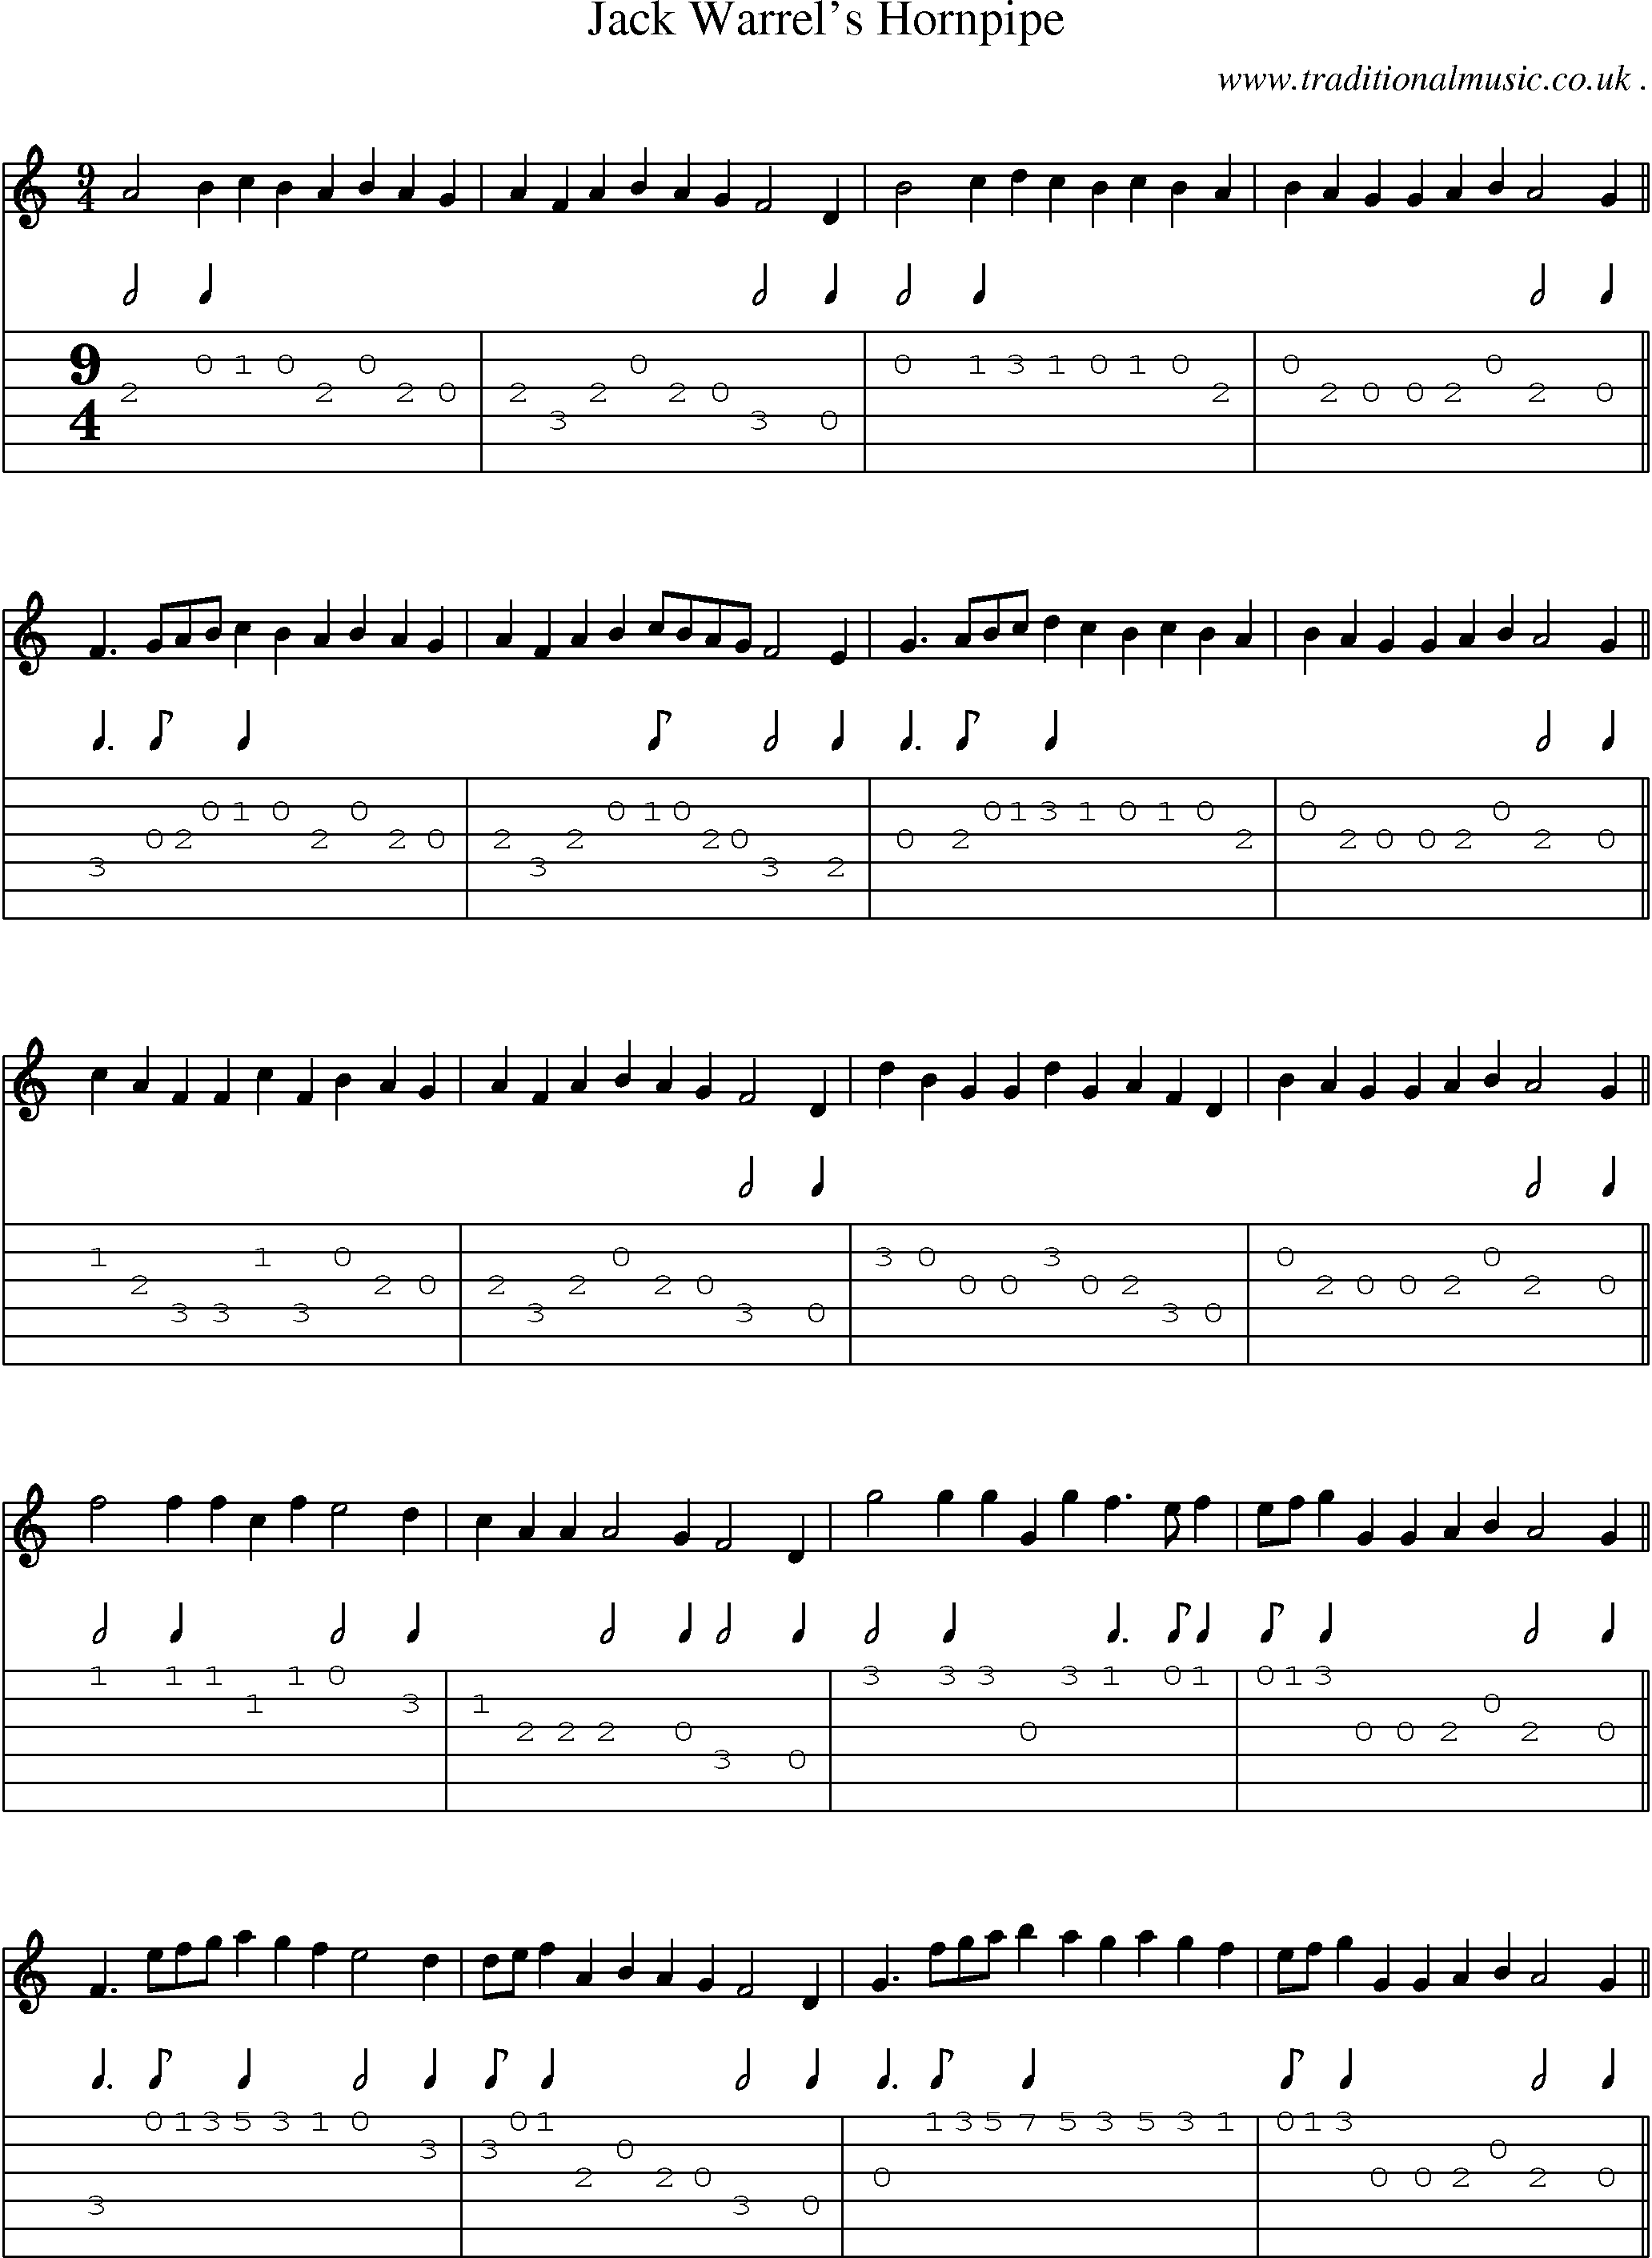 Sheet-Music and Guitar Tabs for Jack Warrels Hornpipe